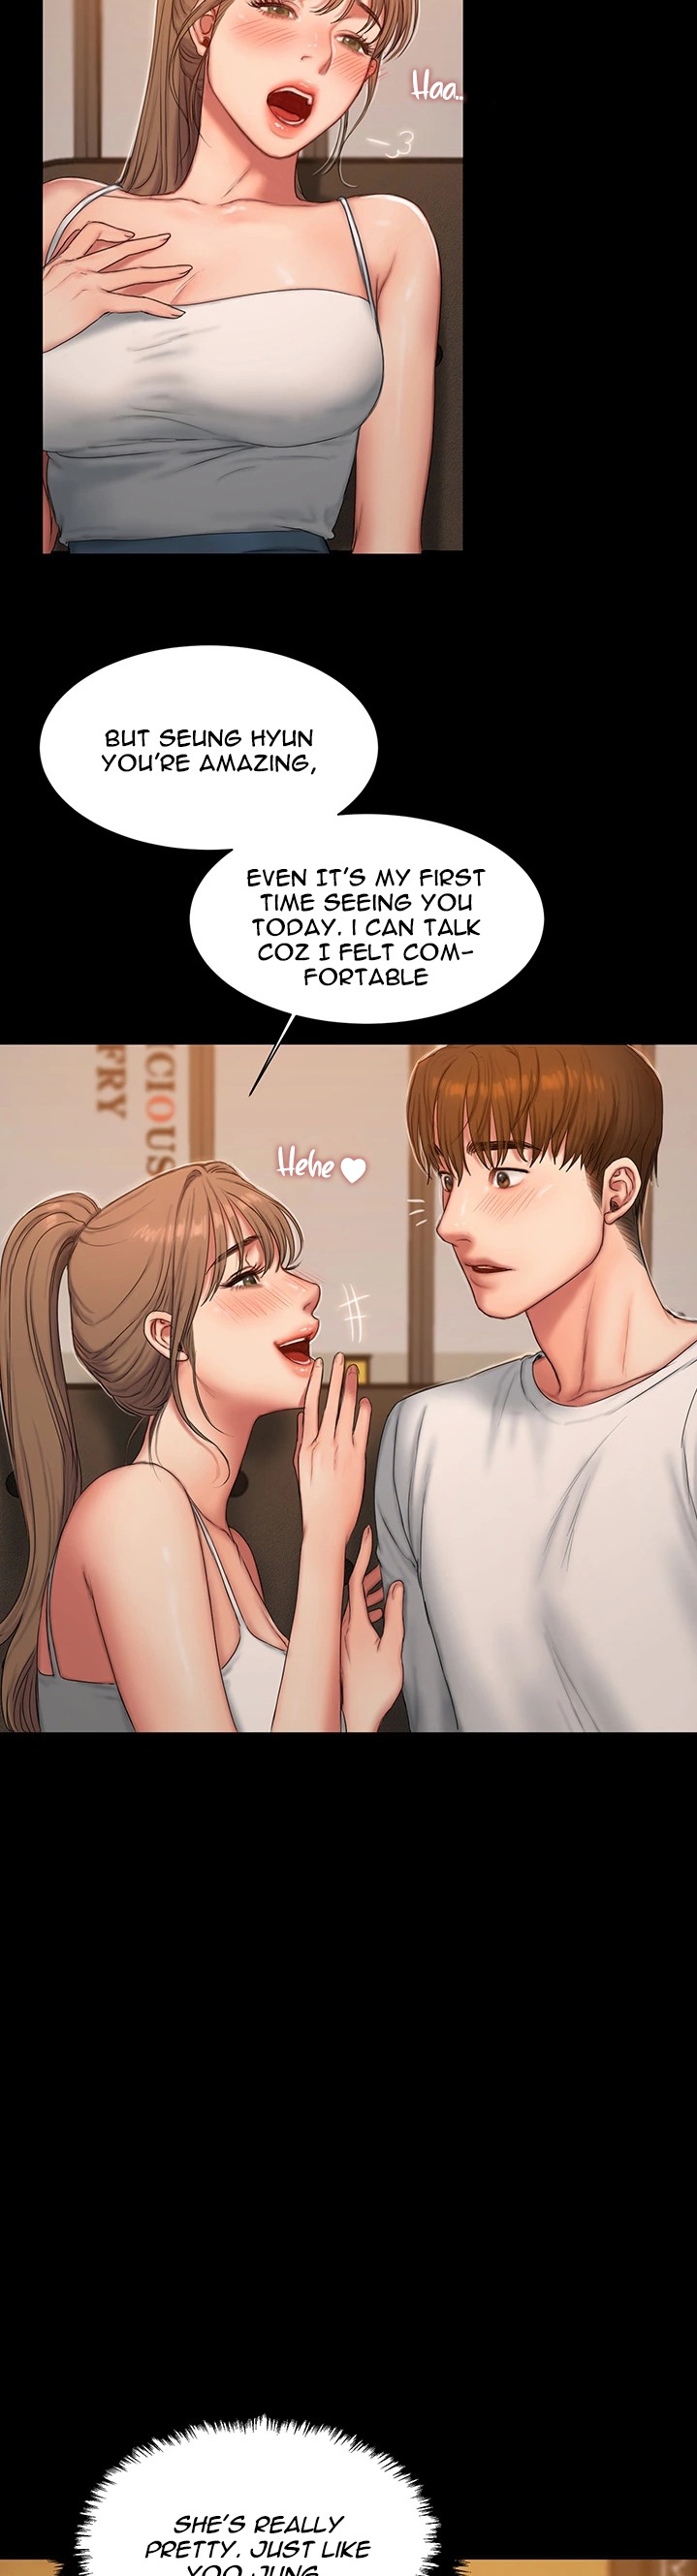 Friends Manhwa - Chapter 1 Page 54